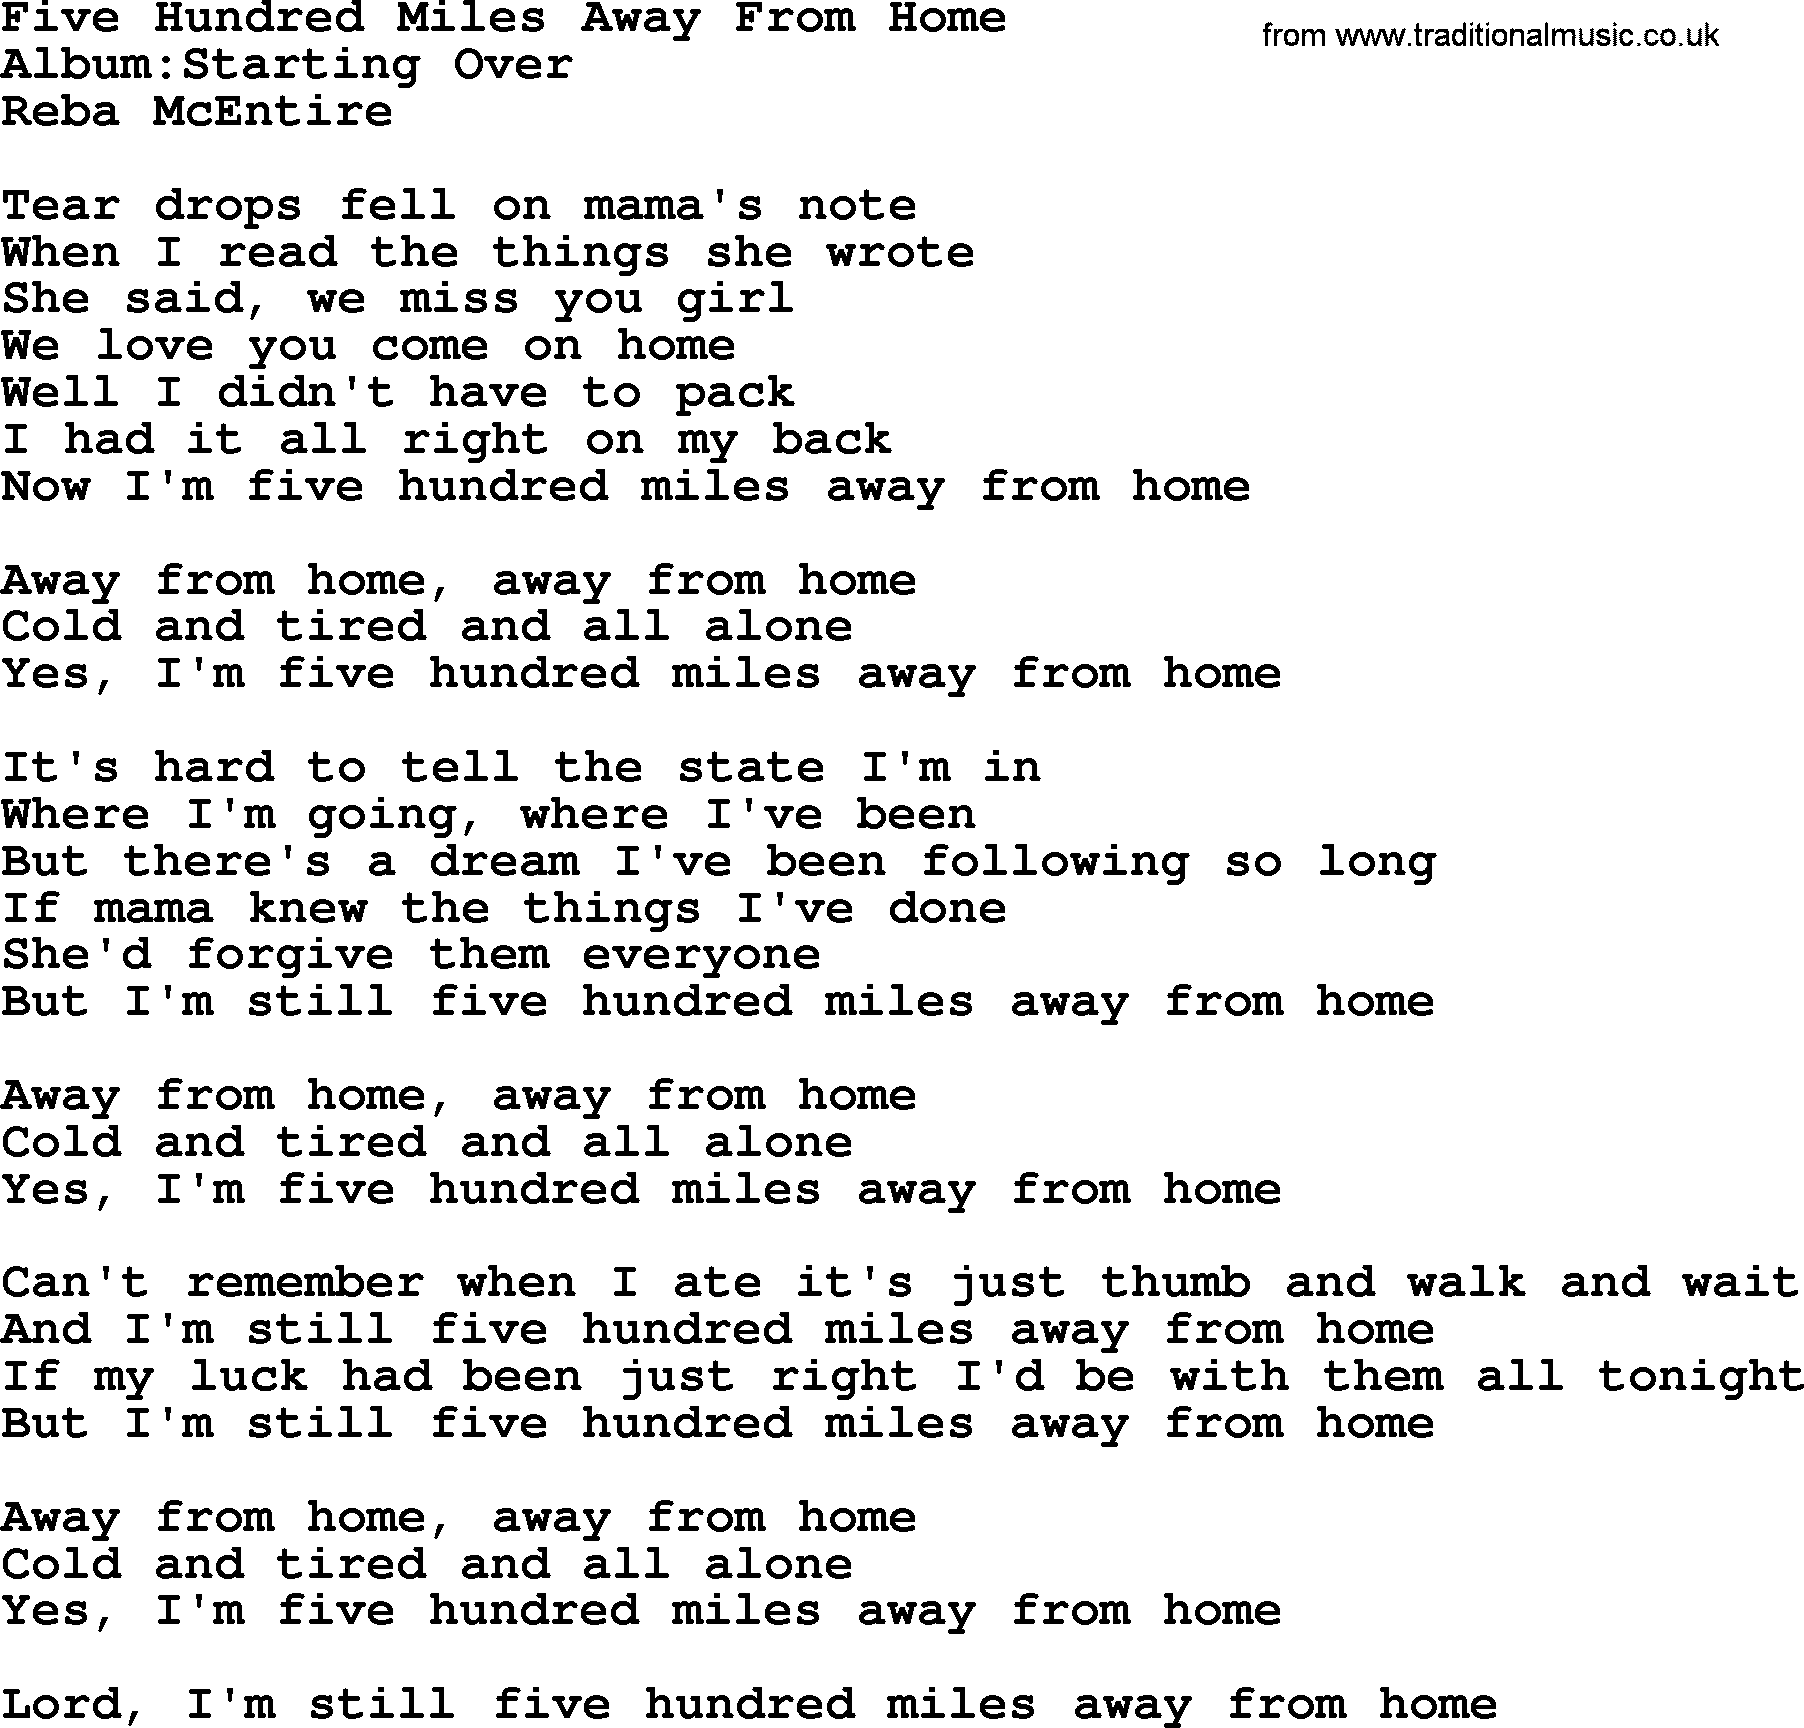 Reba McEntire song: Five Hundred Miles Away From Home lyrics